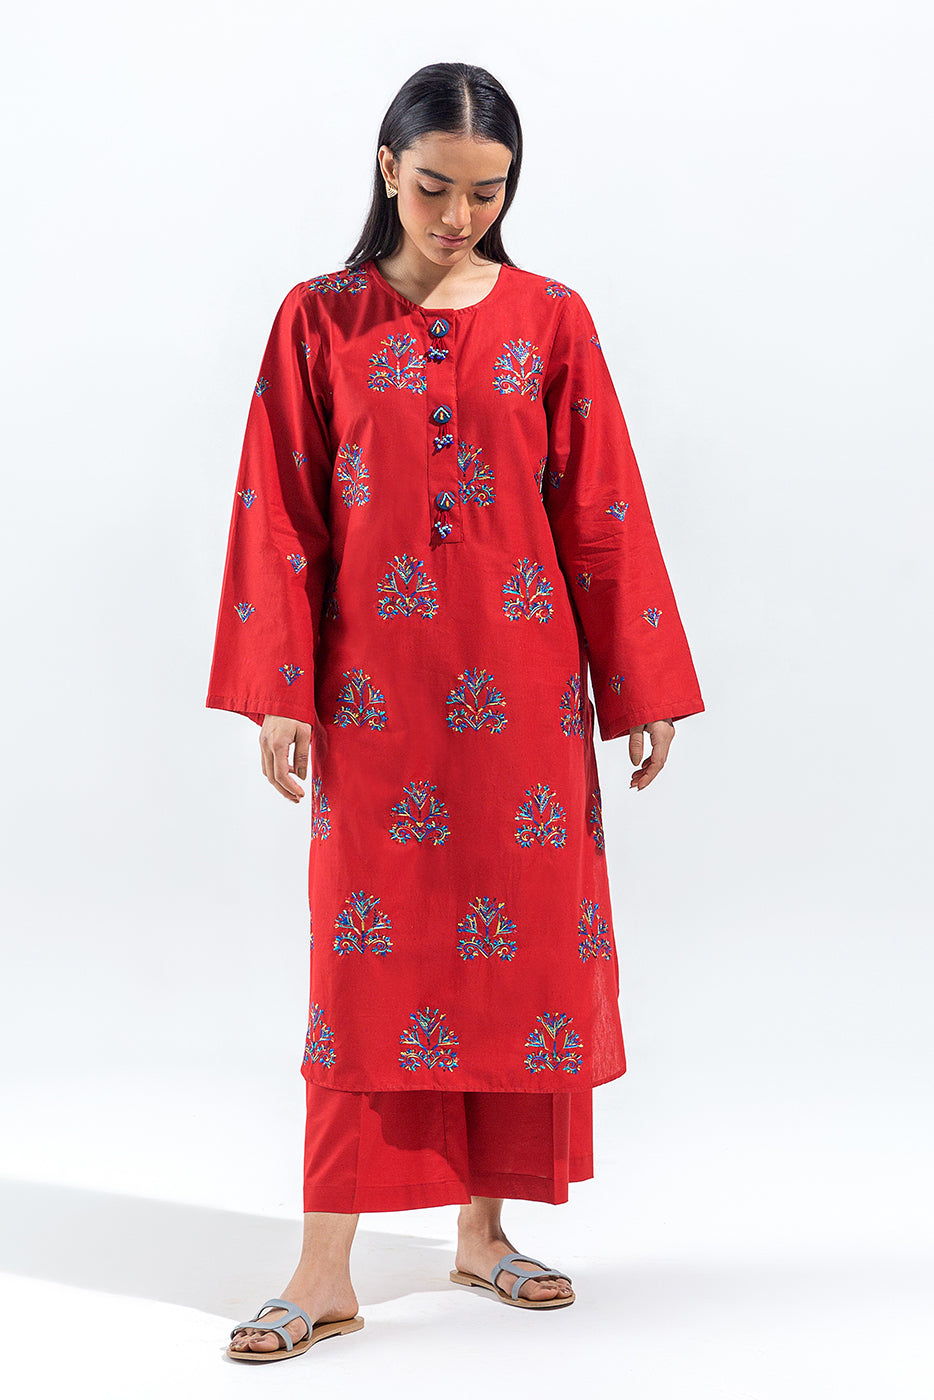 2 PIECE EMBROIDERED MULTI NEPS SUIT (PRET) - BEECHTREE